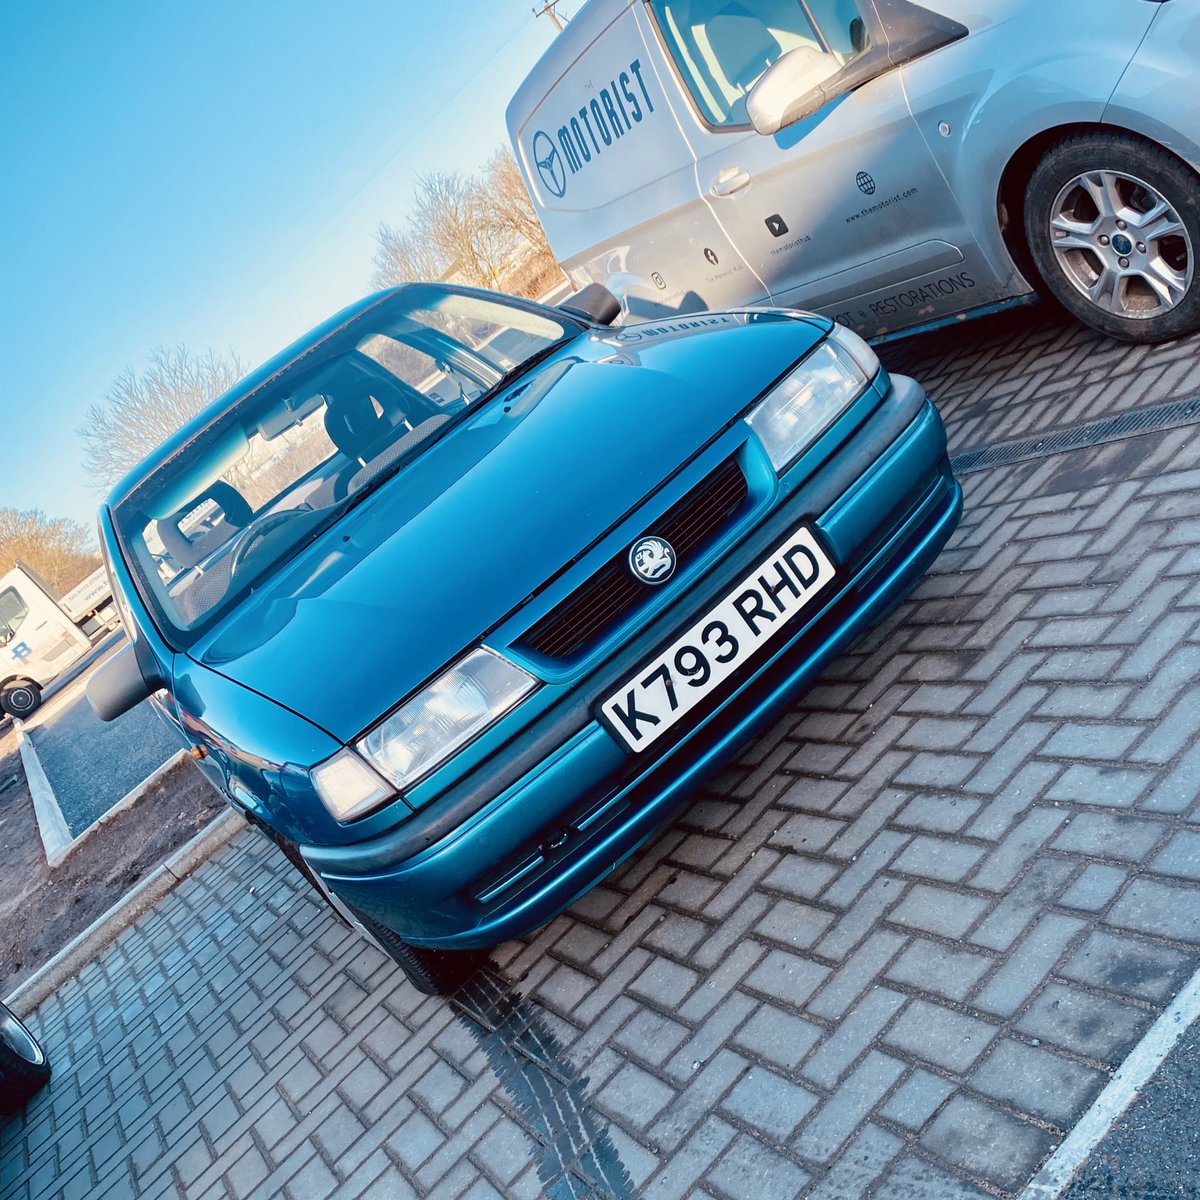 My lovely Proton is away filming something for TV today, so I’m in the rep mobile 😍. 

Pleased this got saved and didn’t end up getting scrapped, it’s far too nice to be a bean tin. 

#vauxhall #weirdcartwitter #vauxhallcavalier